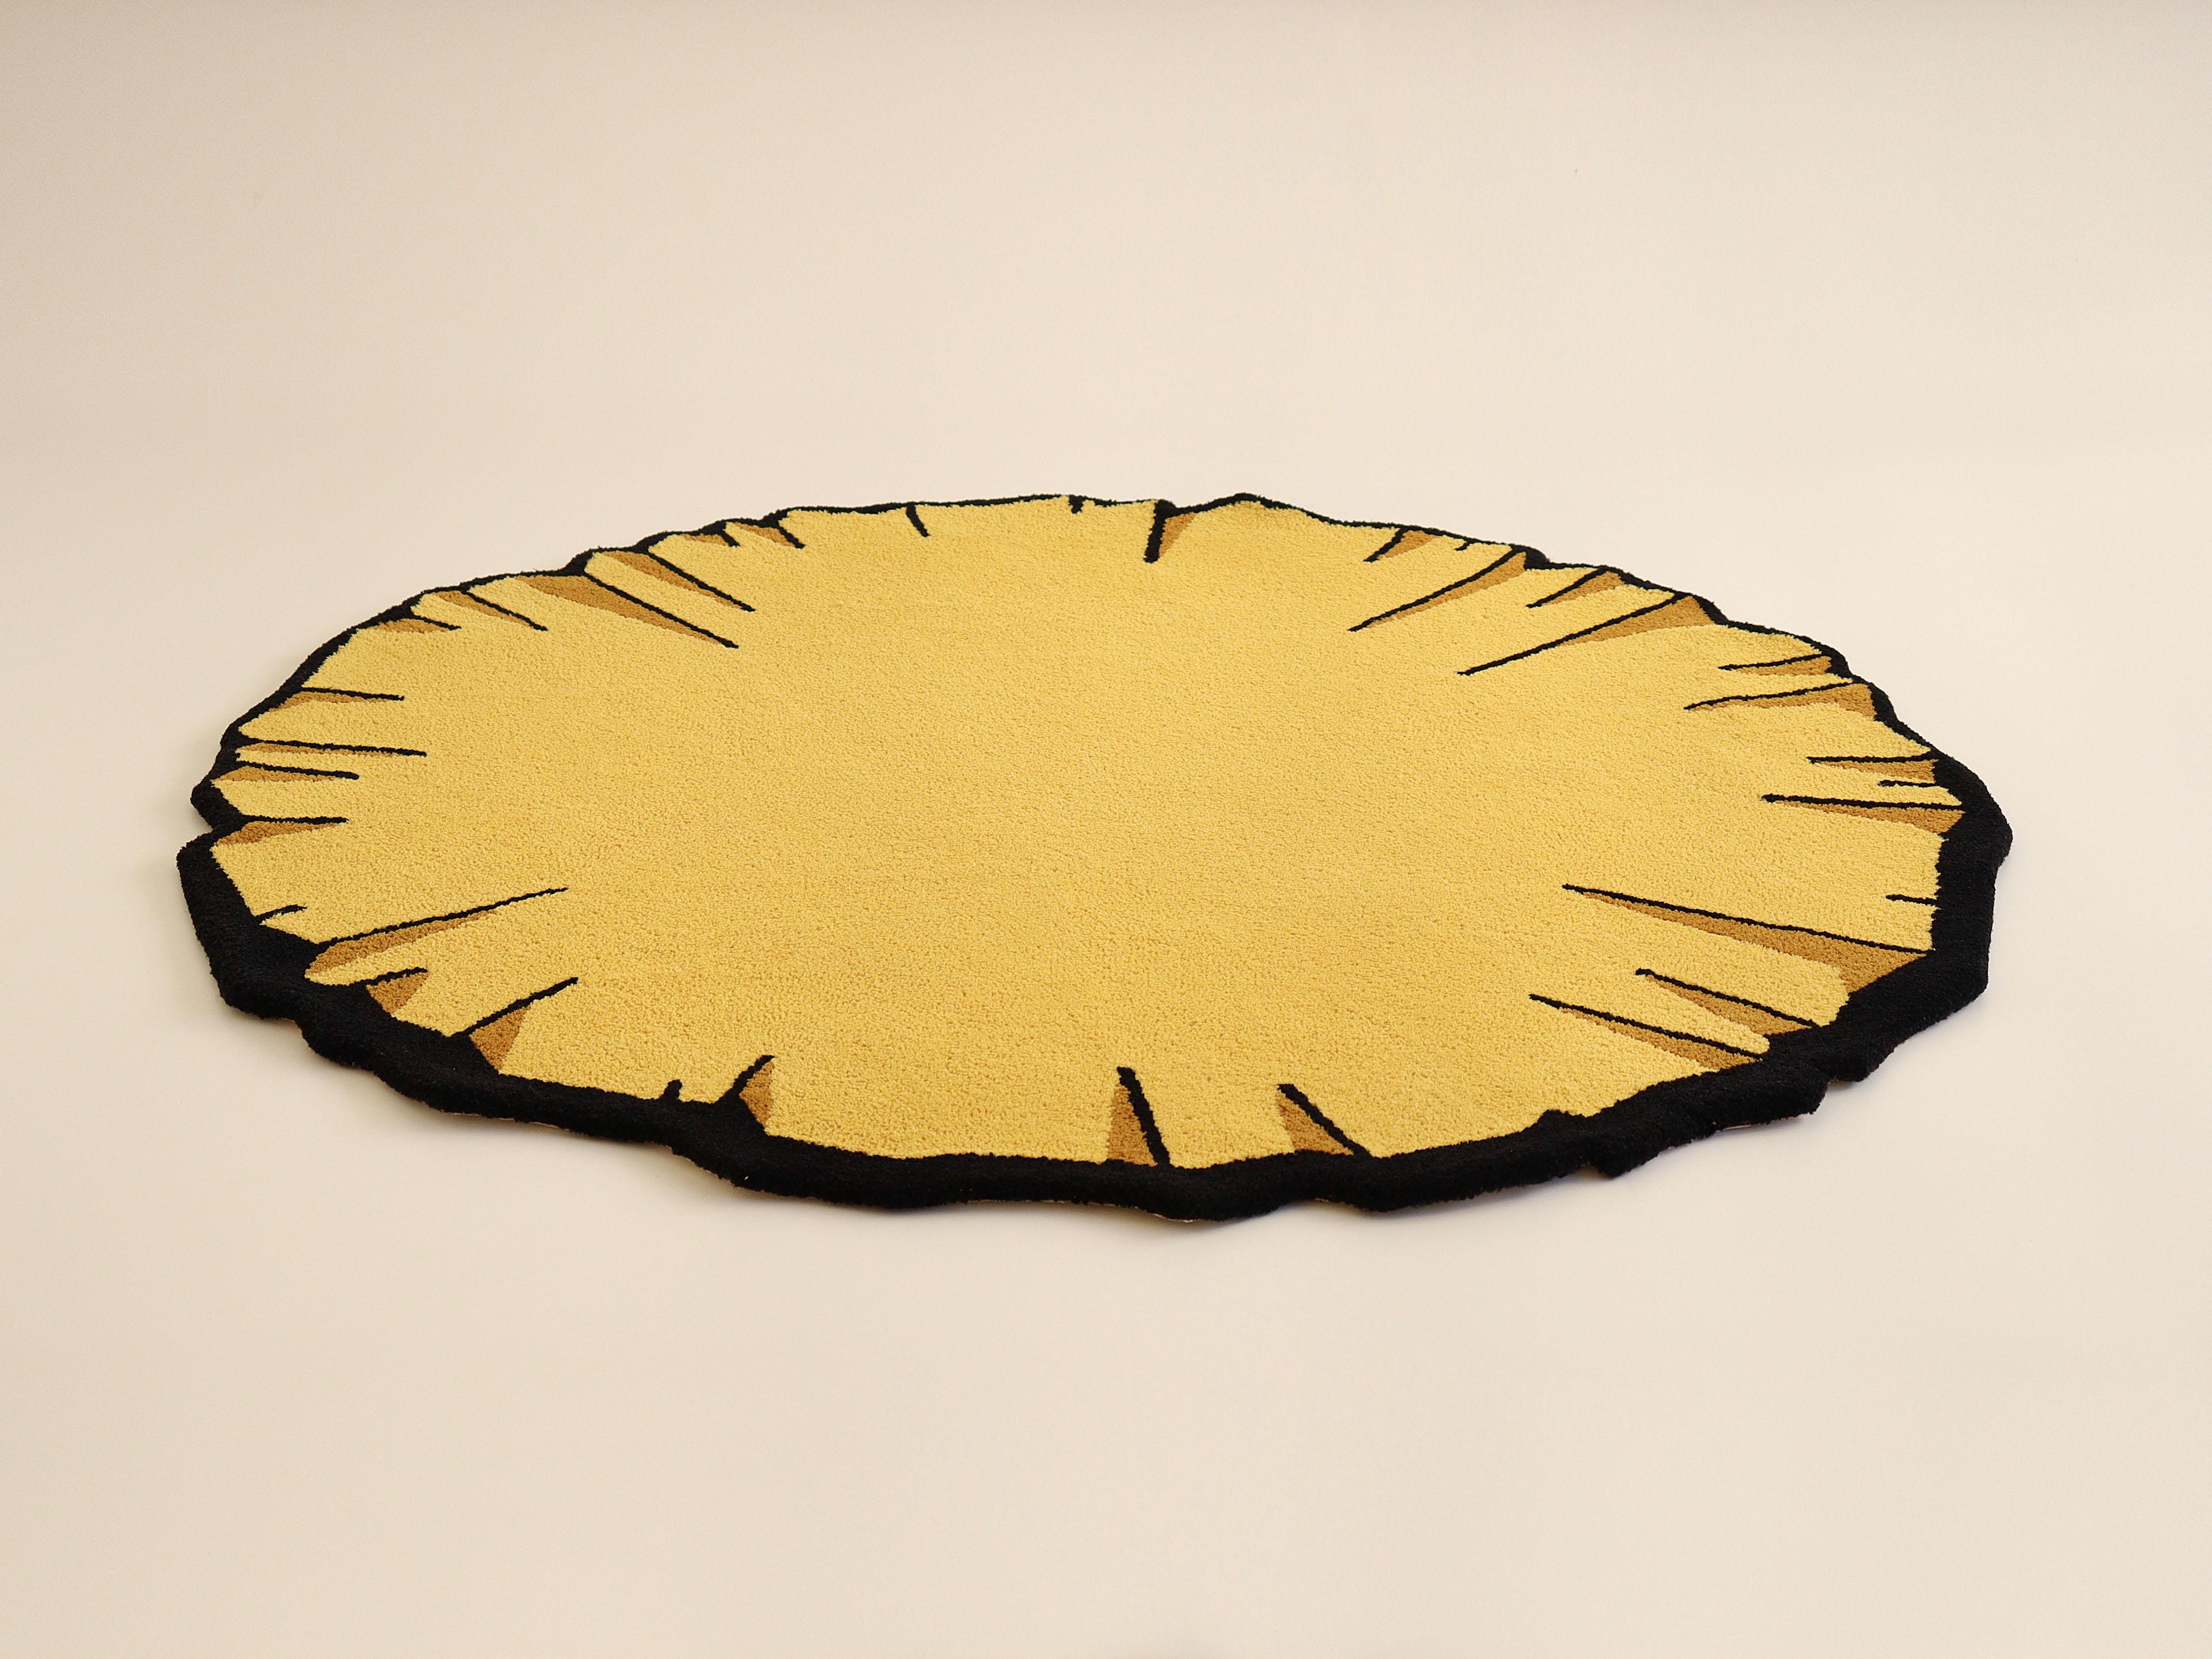 Brazilian Round Yellow Crumpled Rug from Graffiti Collection by Paulo Kobylka For Sale